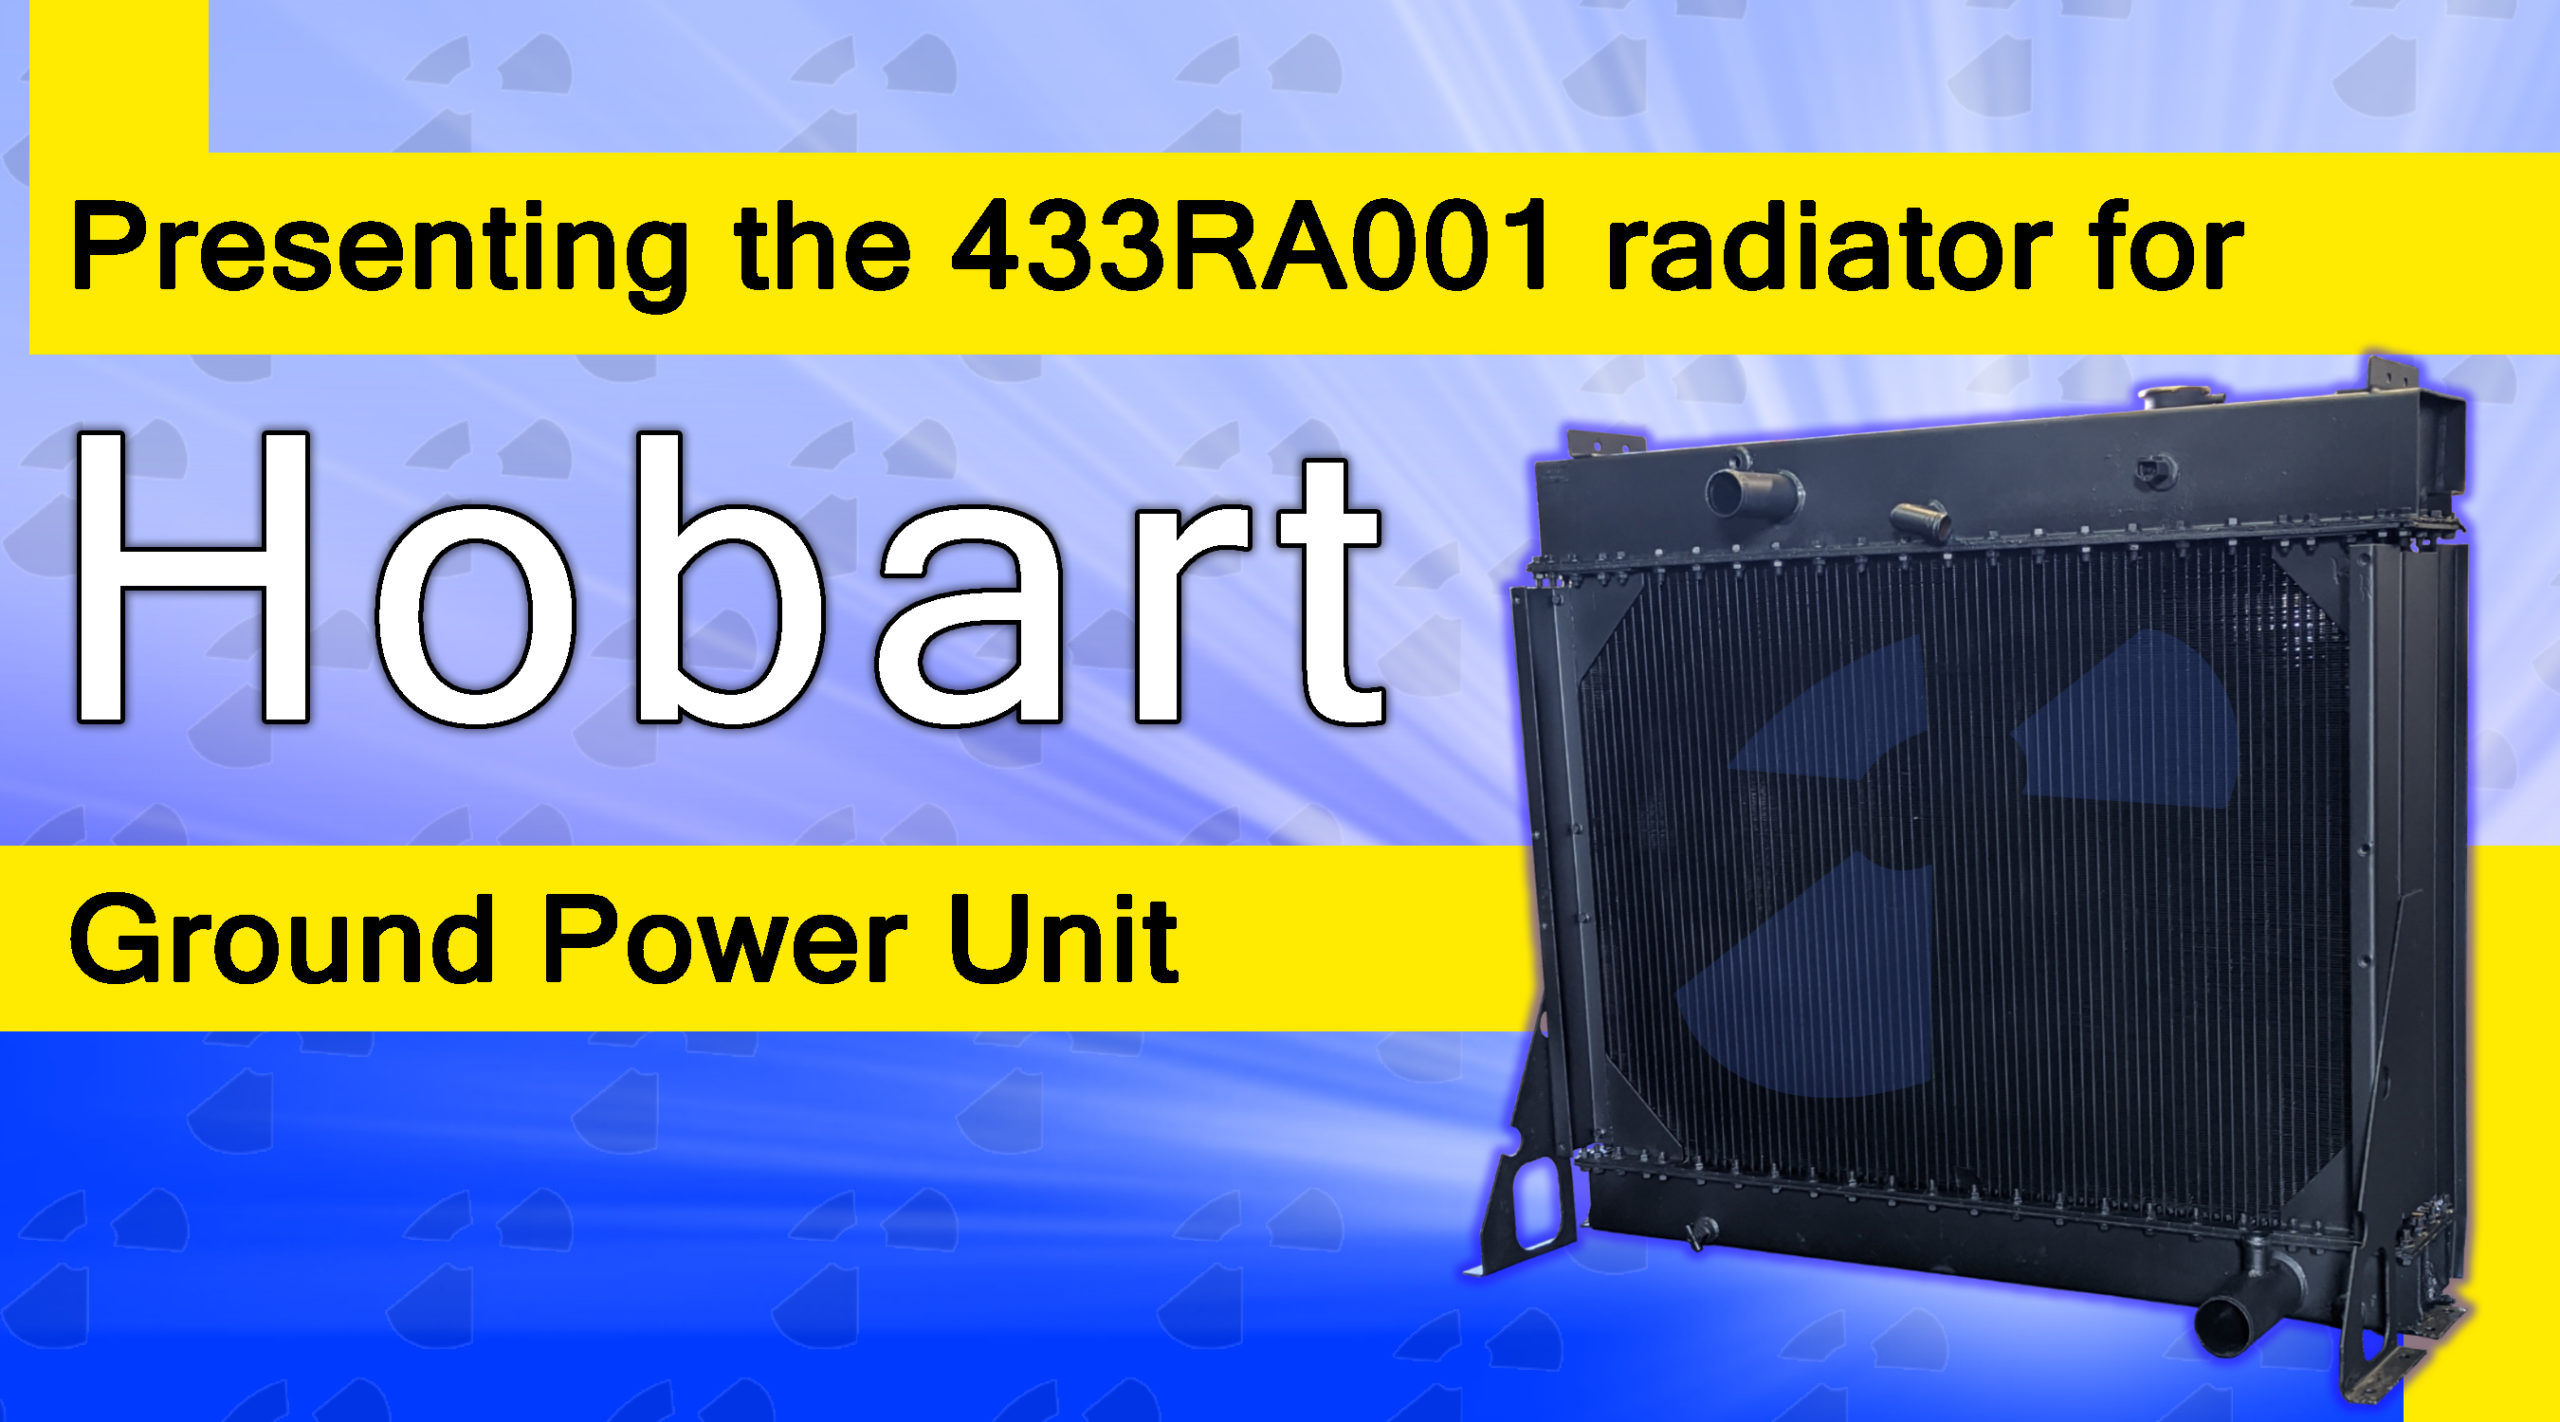 Introducing the 433RA001 radiator for Hobart Ground Power Unit.